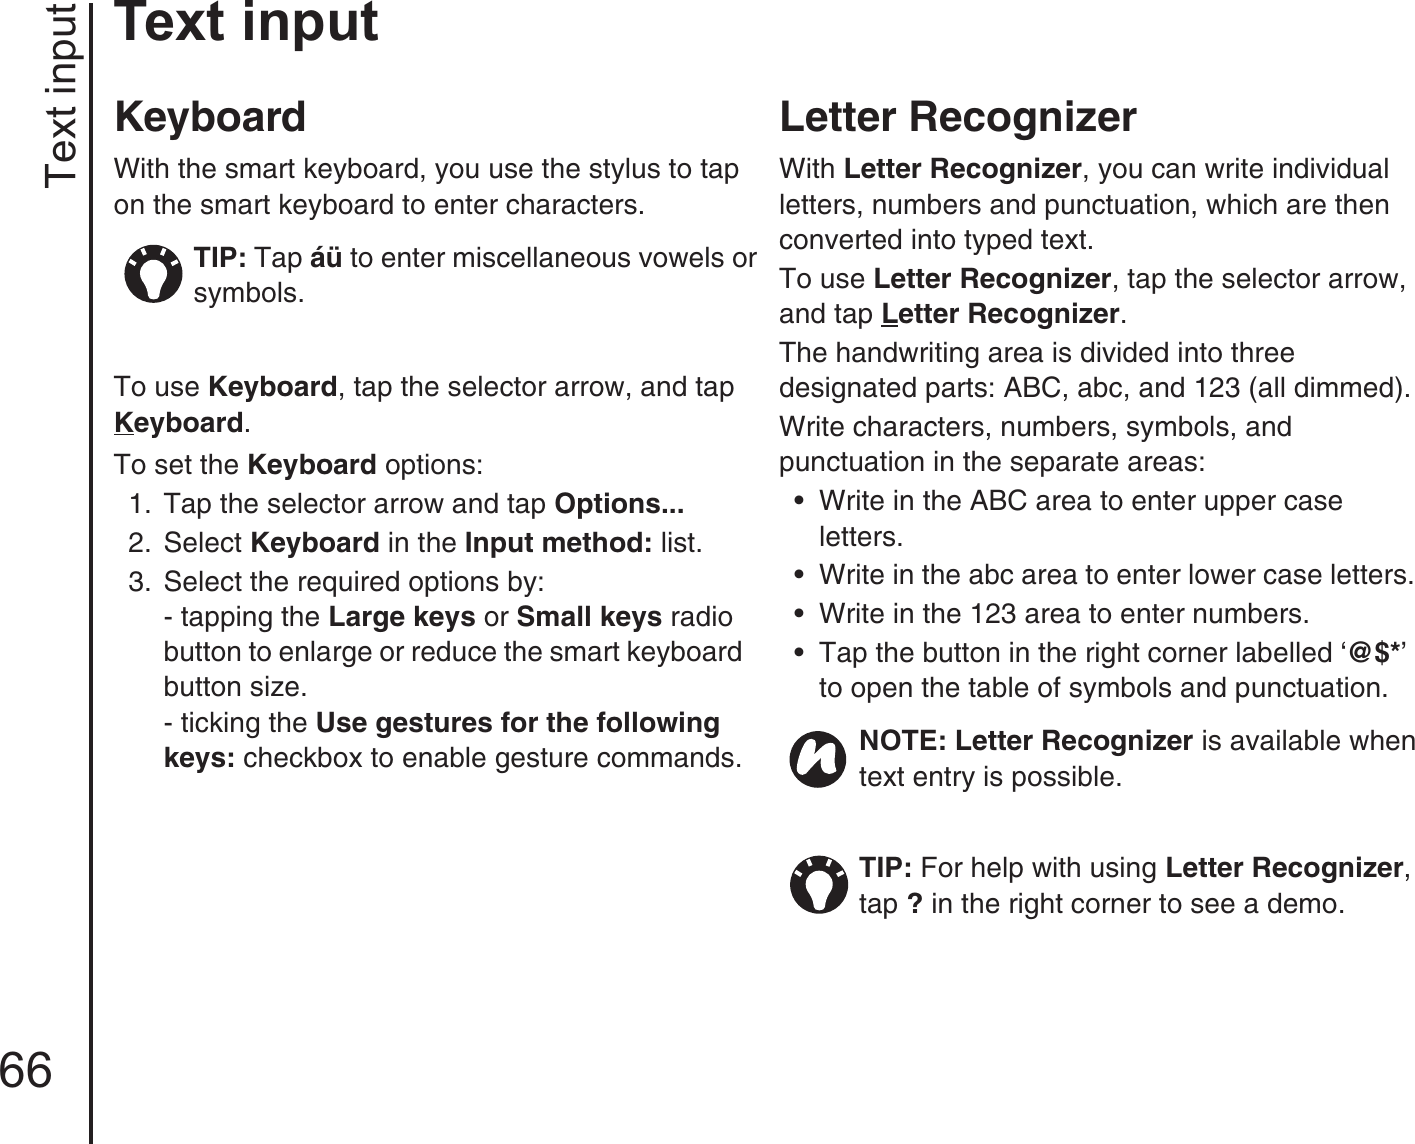 Text input66Text inputKeyboardWith the smart keyboard, you use the stylus to tap on the smart keyboard to enter characters. To use Keyboard, tap the selector arrow, and tap Keyboard.To set the Keyboard options:1.  Tap the selector arrow and tap Options...2.  Select Keyboard in the Input method: list.3.  Select the required options by:- tapping the Large keys or Small keys radio button to enlarge or reduce the smart keyboard button size.- ticking the Use gestures for the following keys: checkbox to enable gesture commands.Letter RecognizerWith Letter Recognizer, you can write individual letters, numbers and punctuation, which are then converted into typed text.To use Letter Recognizer, tap the selector arrow, and tap Letter Recognizer.The handwriting area is divided into three designated parts: ABC, abc, and 123 (all dimmed).Write characters, numbers, symbols, and punctuation in the separate areas:• Write in the ABC area to enter upper case letters.• Write in the abc area to enter lower case letters.• Write in the 123 area to enter numbers.• Tap the button in the right corner labelled ‘@$*’ to open the table of symbols and punctuation.TIP: Tap áü to enter miscellaneous vowels or symbols. NOTE: Letter Recognizer is available when text entry is possible.TIP: For help with using Letter Recognizer, tap ? in the right corner to see a demo. 